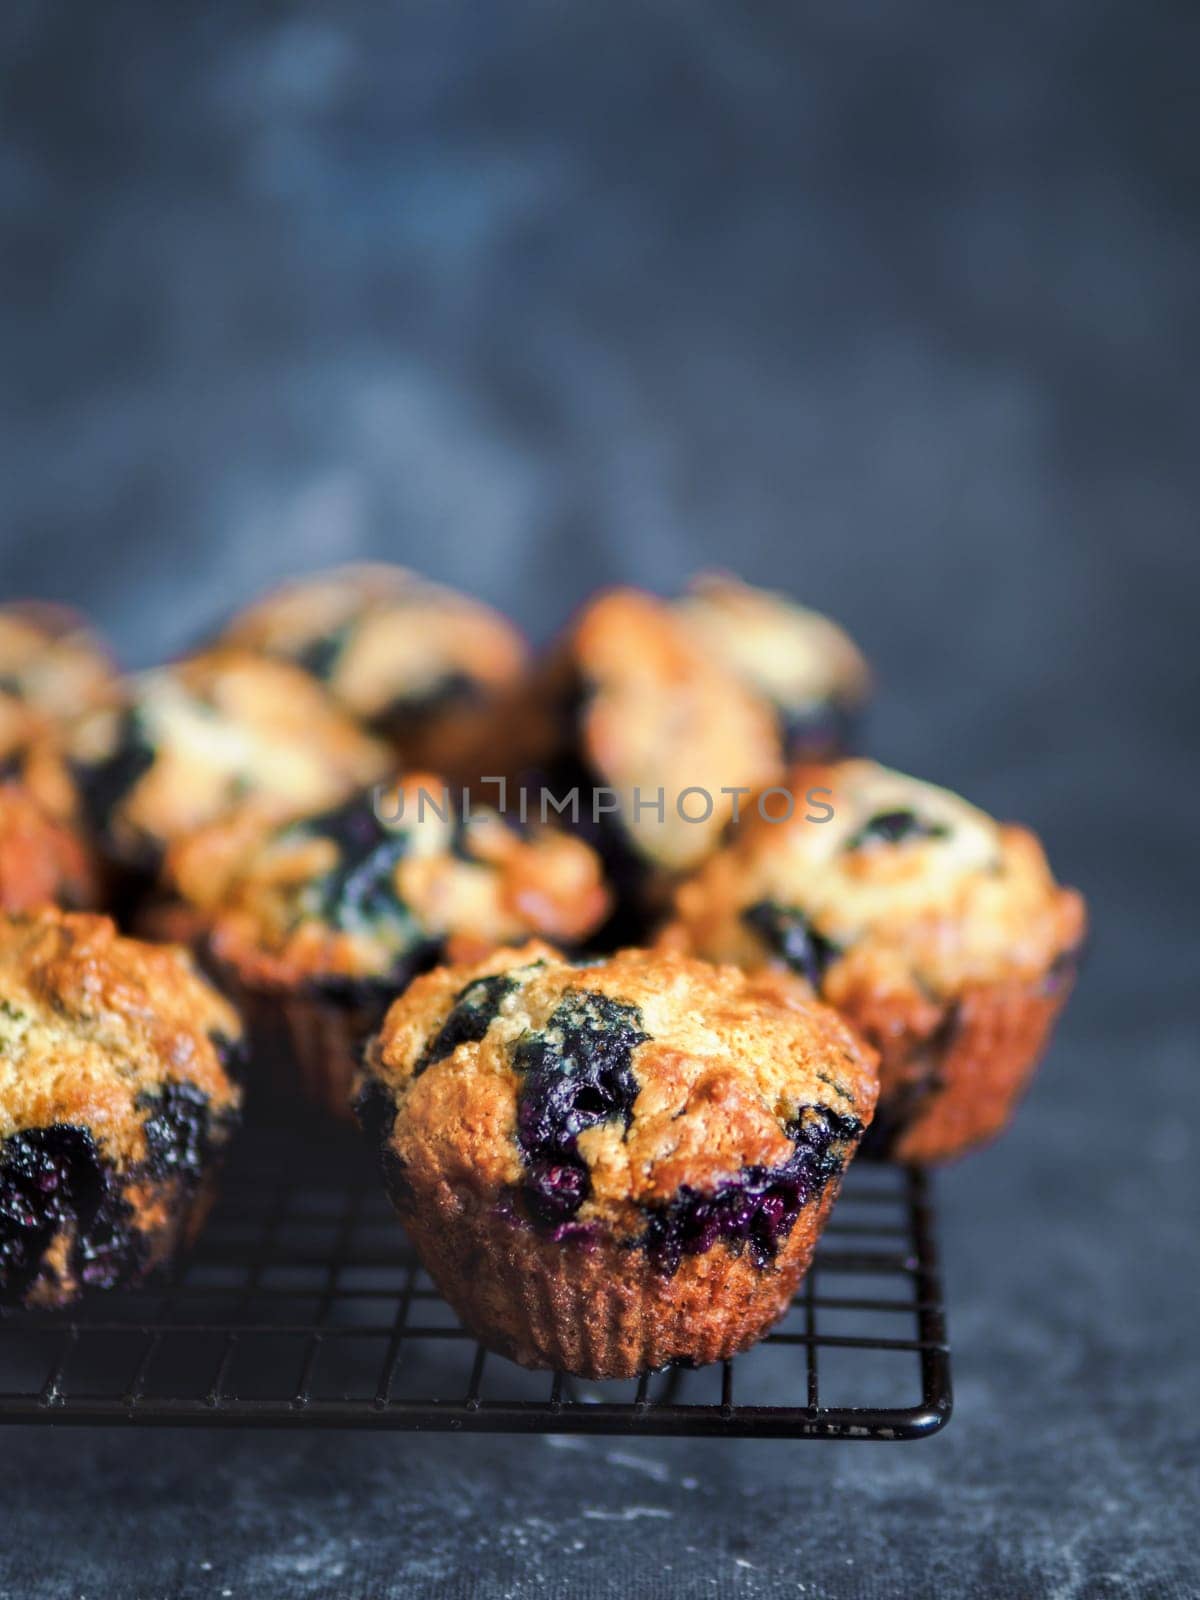 Homemade vegan blueberry muffins on cooling rack. Vegetarian egg-free muffins on dark background. Vertical. Copy space for text or design.